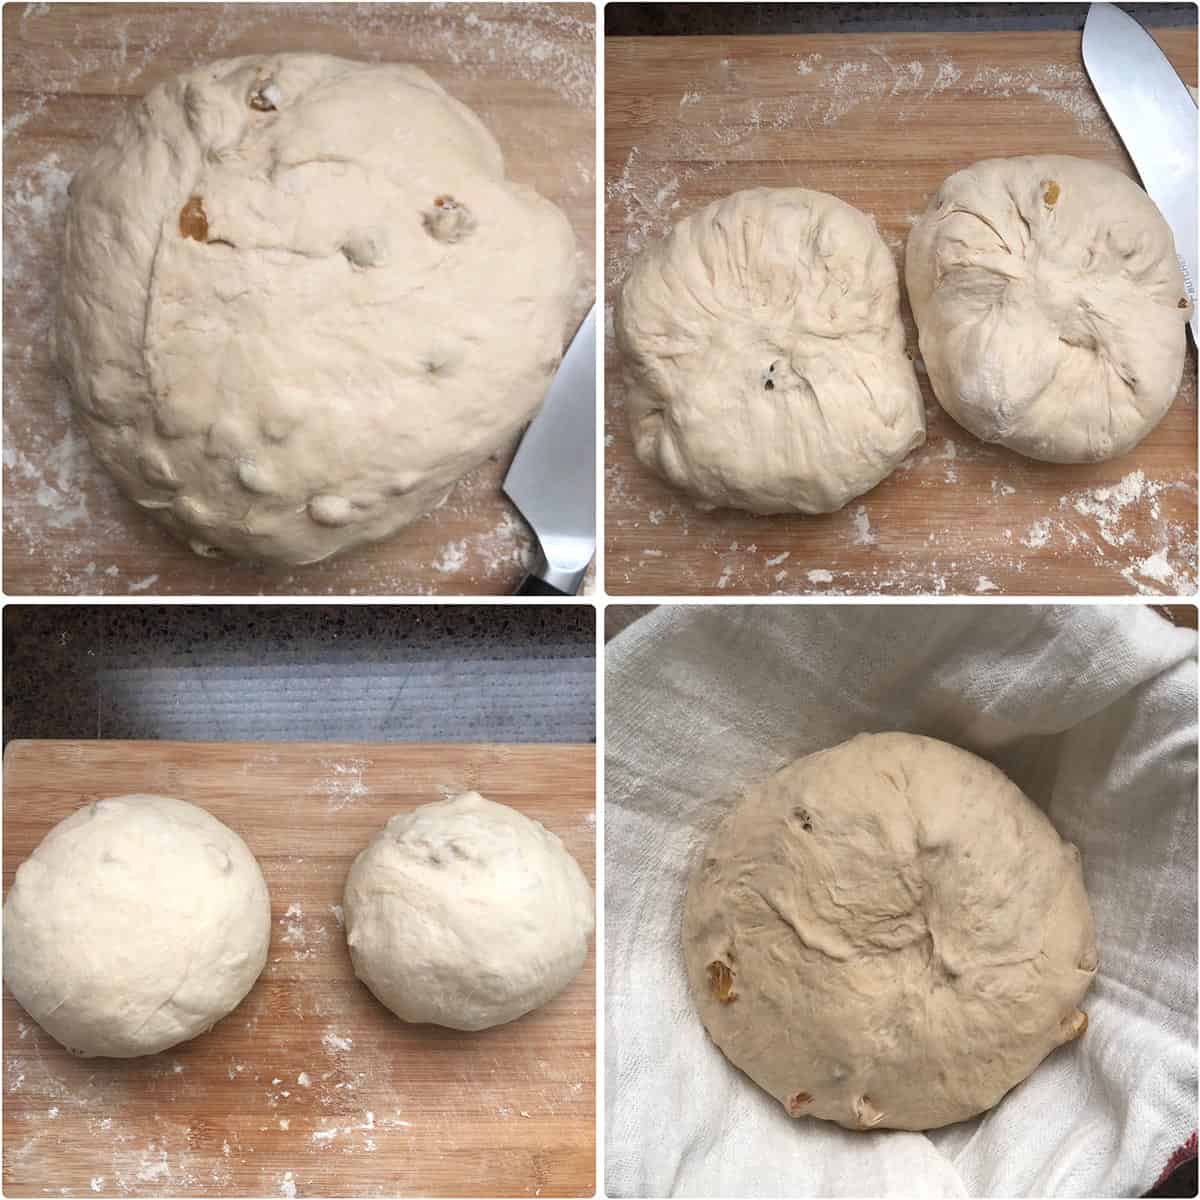 Pre-shaping and shaping of sourdough bread